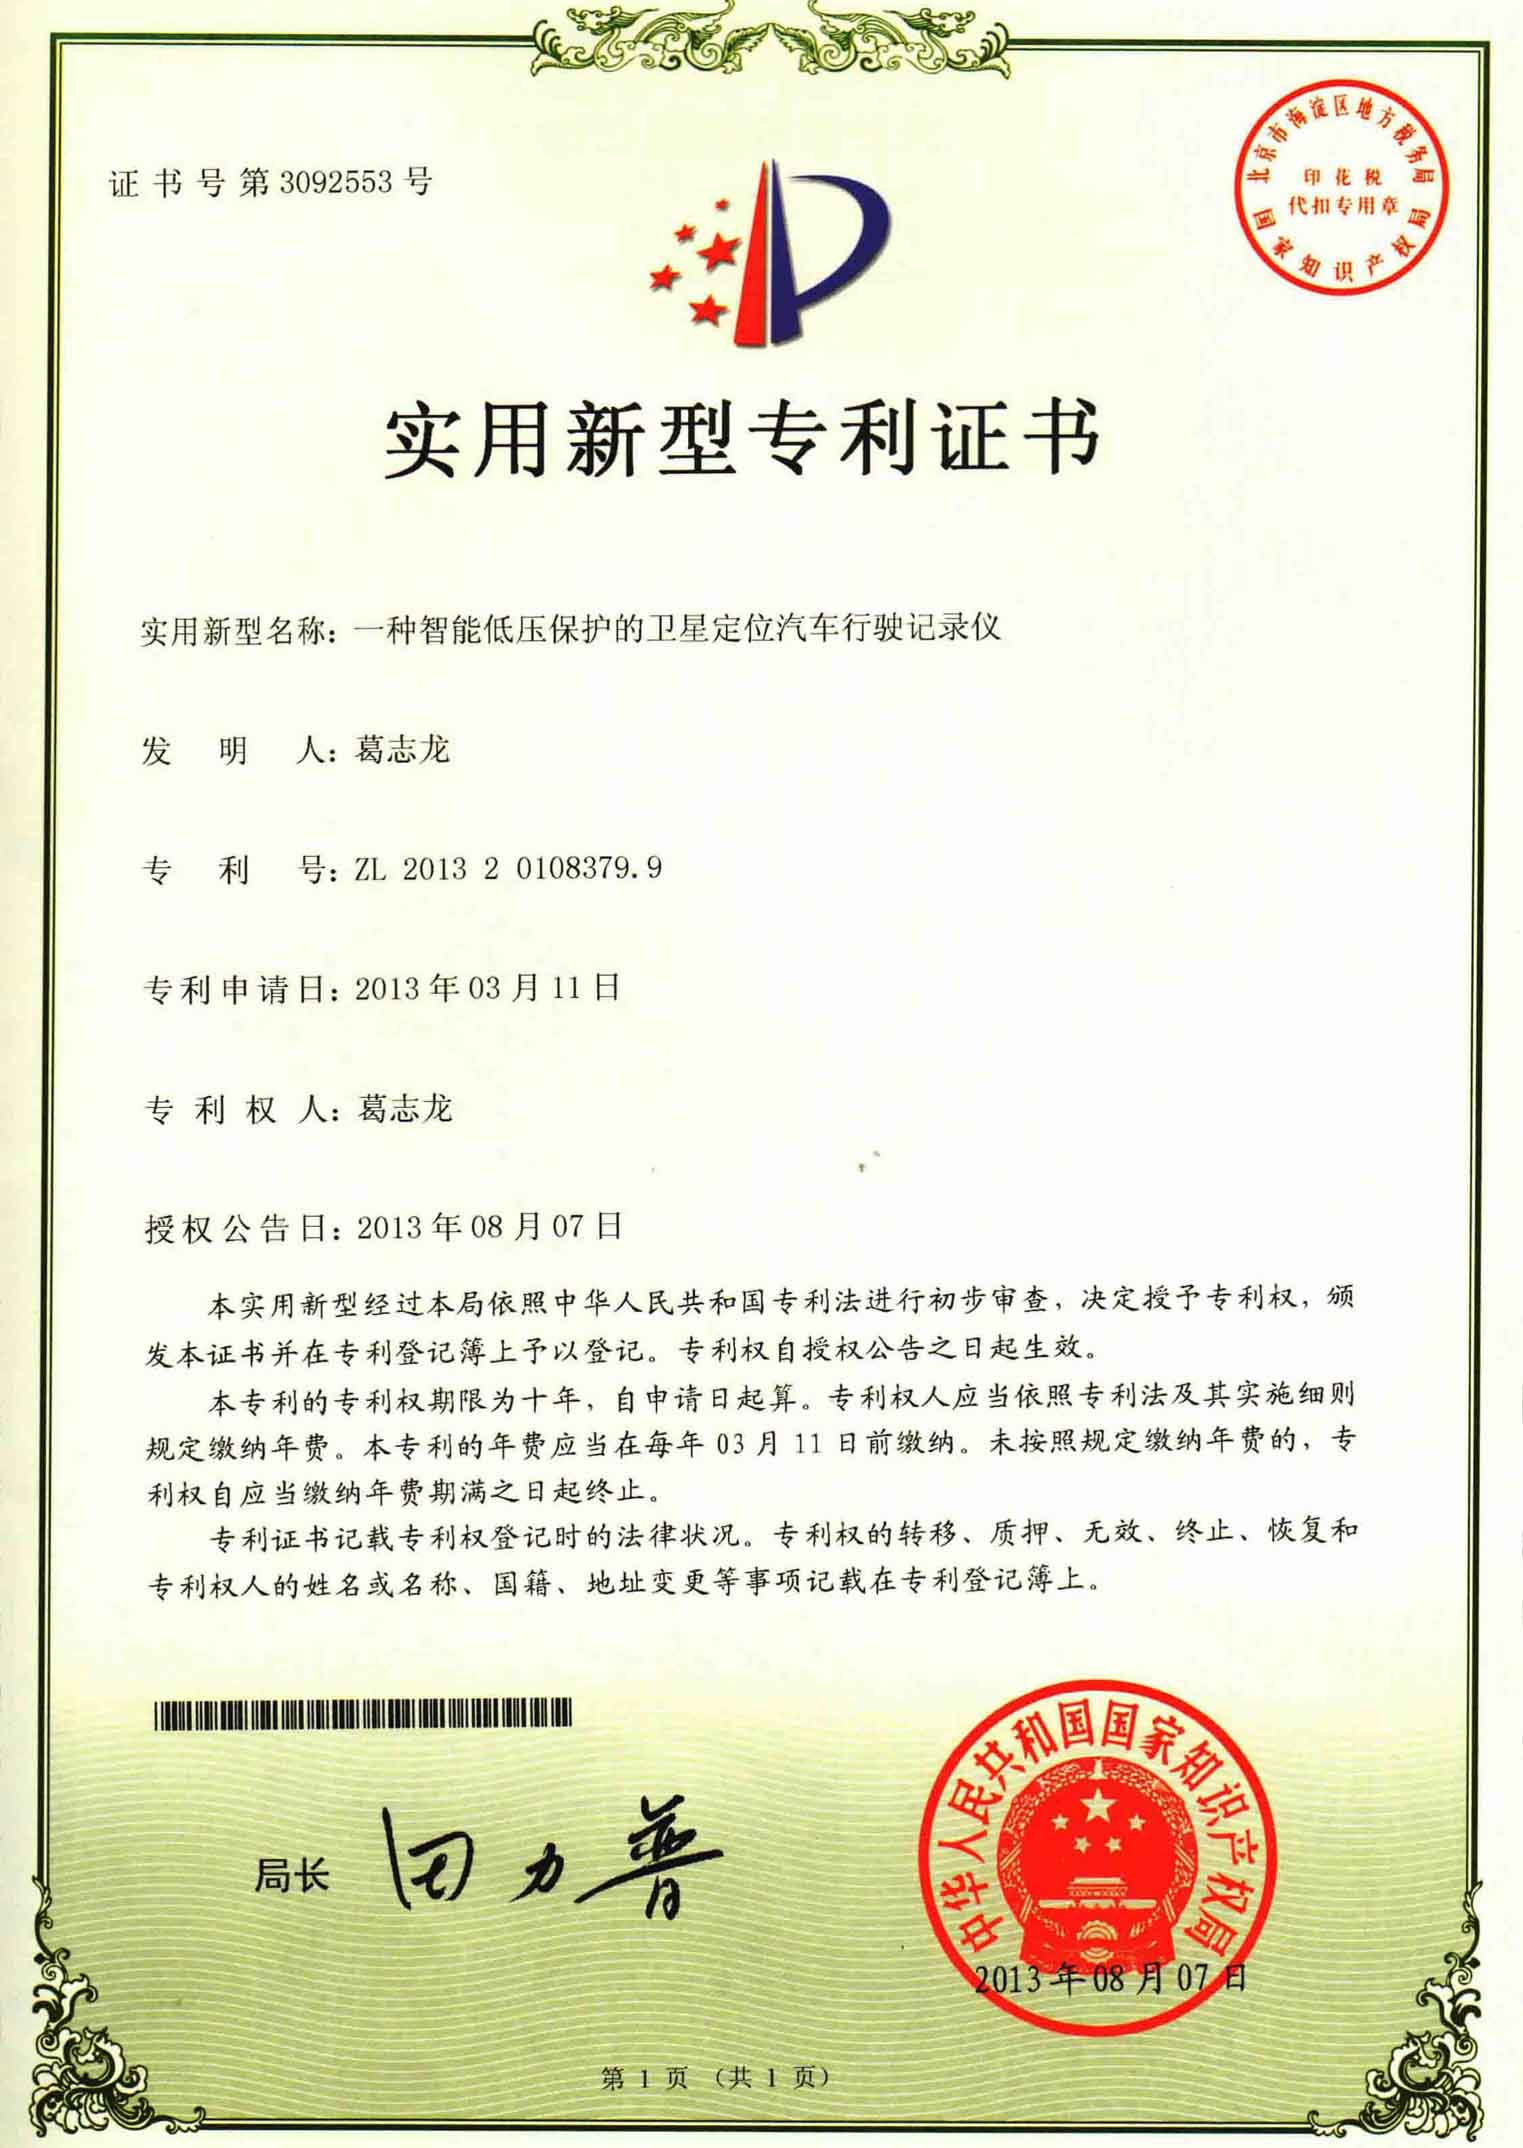 Car driving record Utility model patent certificate